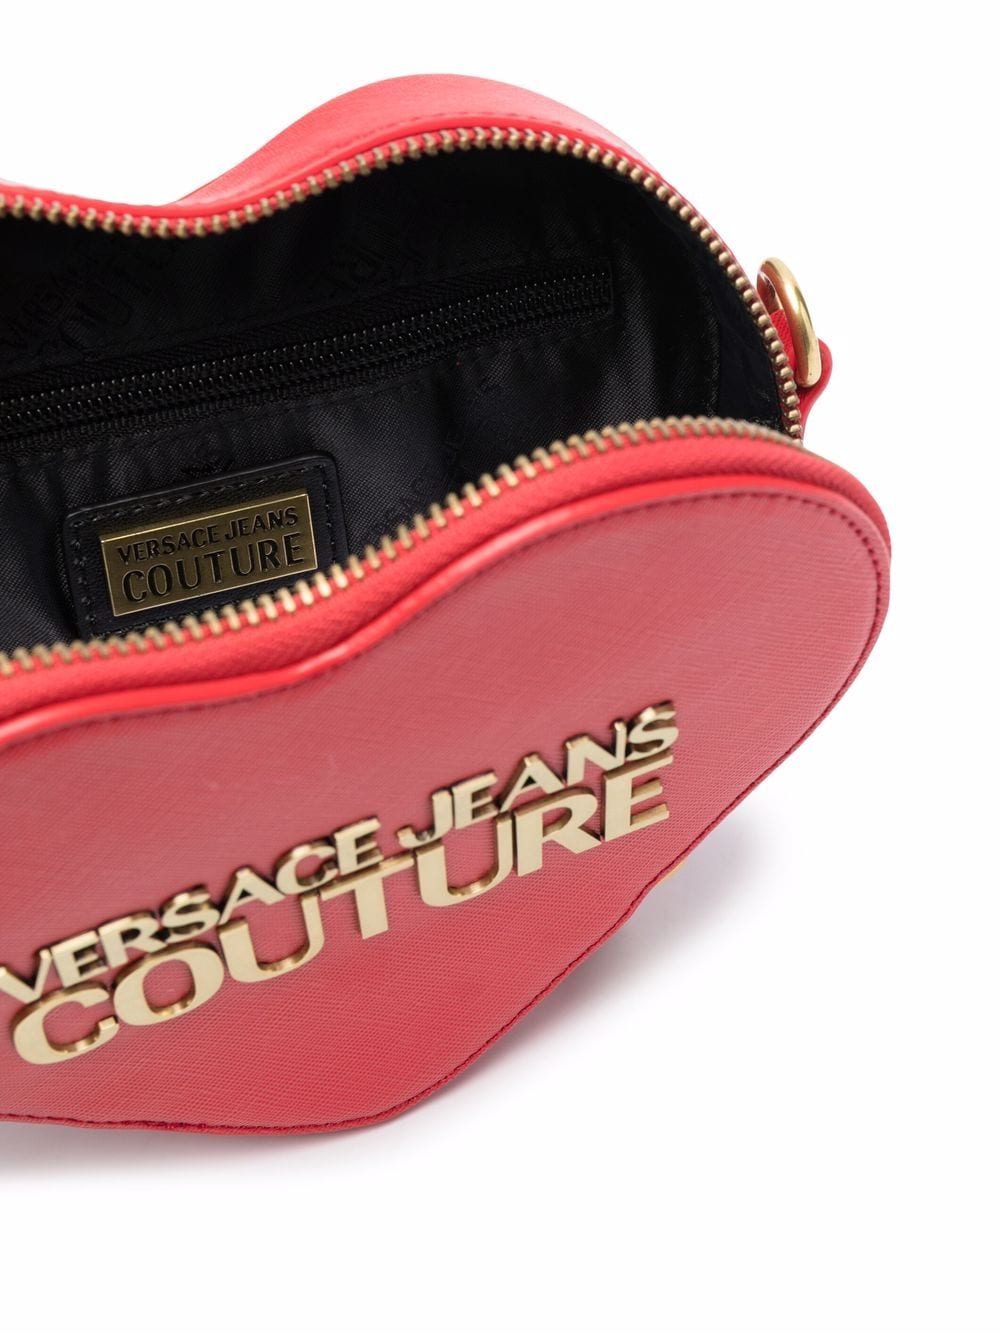 Versace Jeans Couture heart-shaped Crossbody Bag - Farfetch